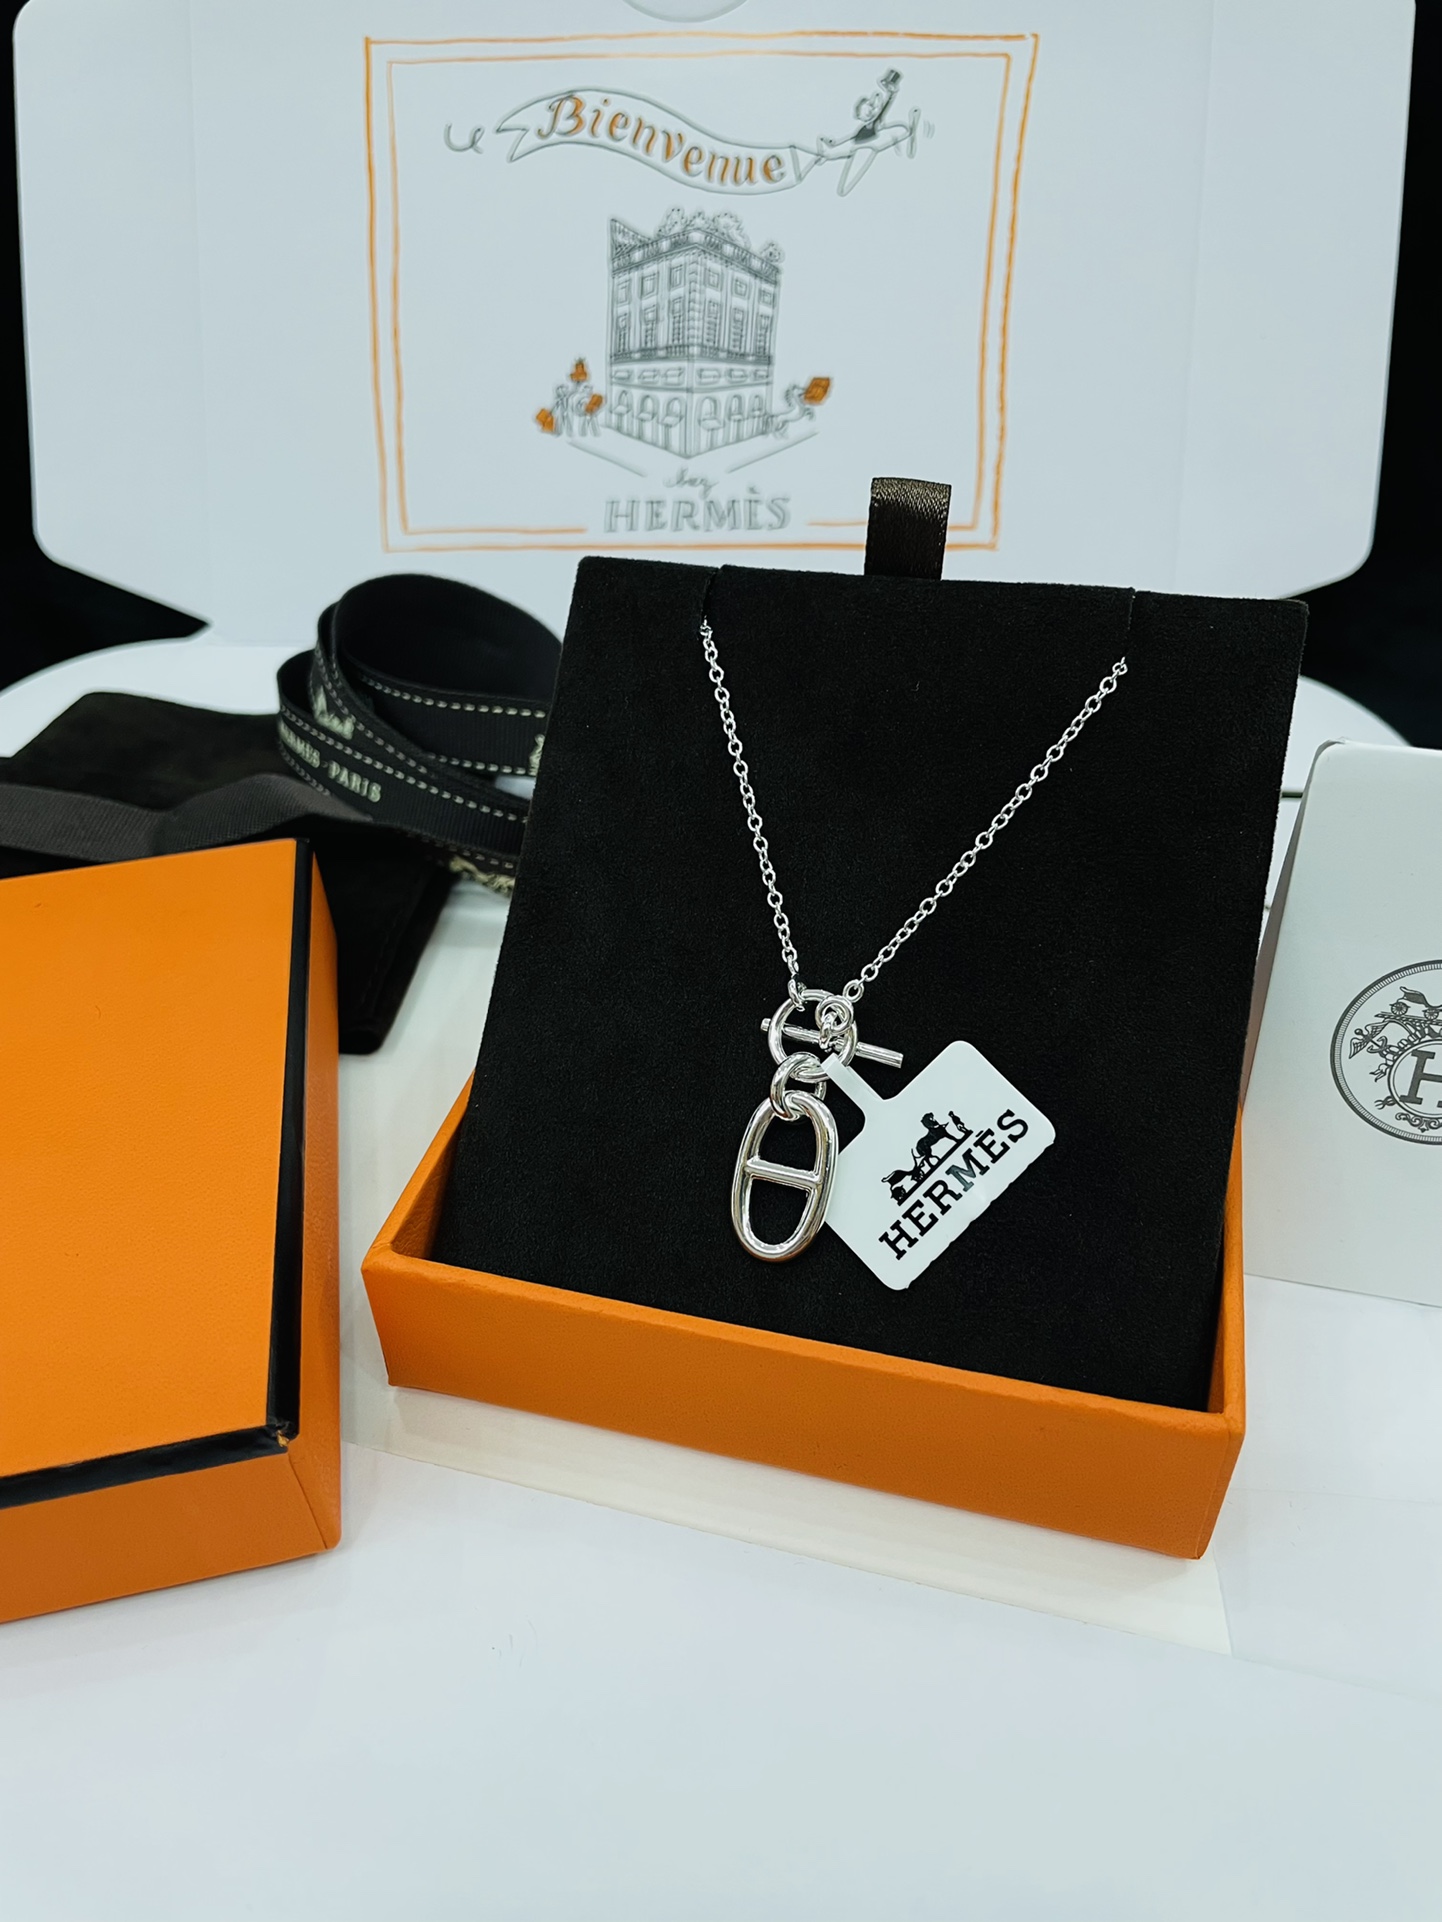 Hermes Jewelry Necklaces & Pendants UK 7 Star Replica
 White 925 Silver